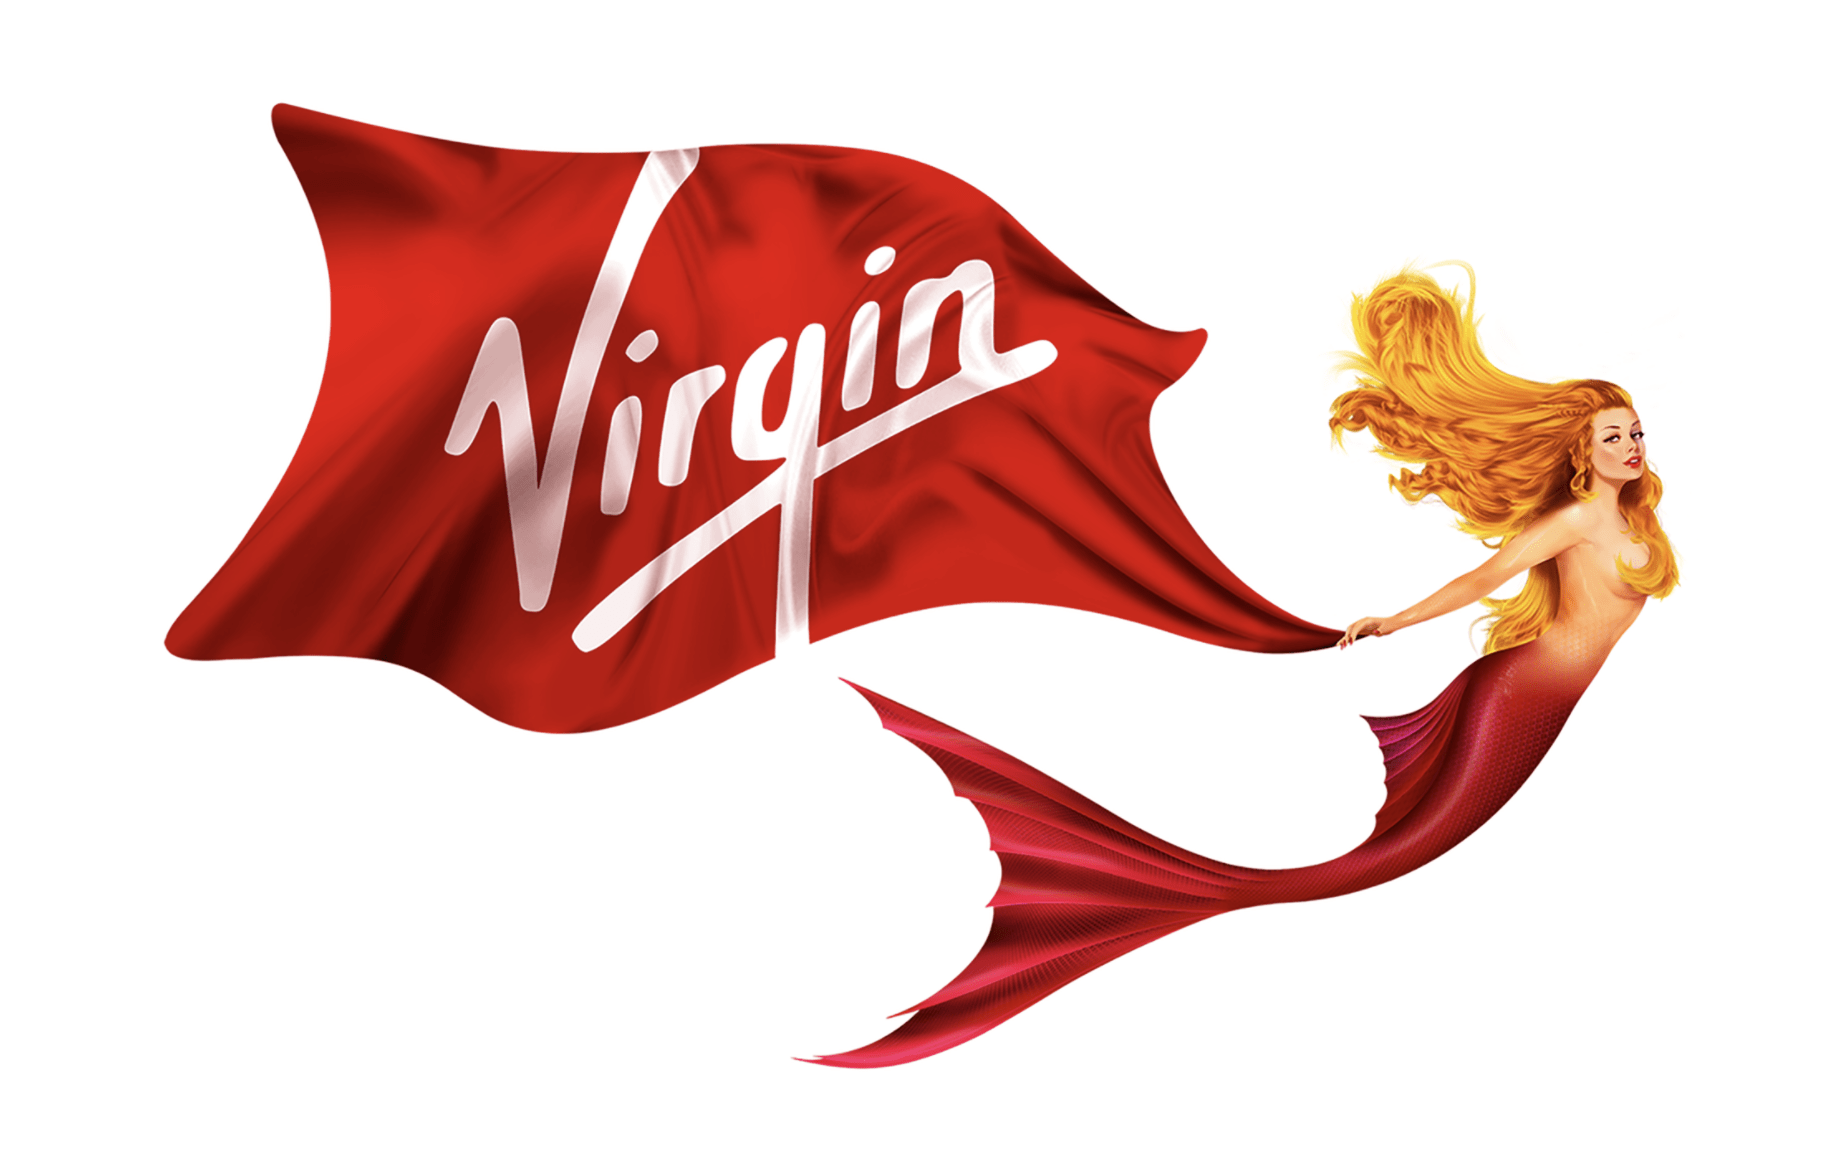 Last chance to put down deposits for new Virgin Voyages cruise